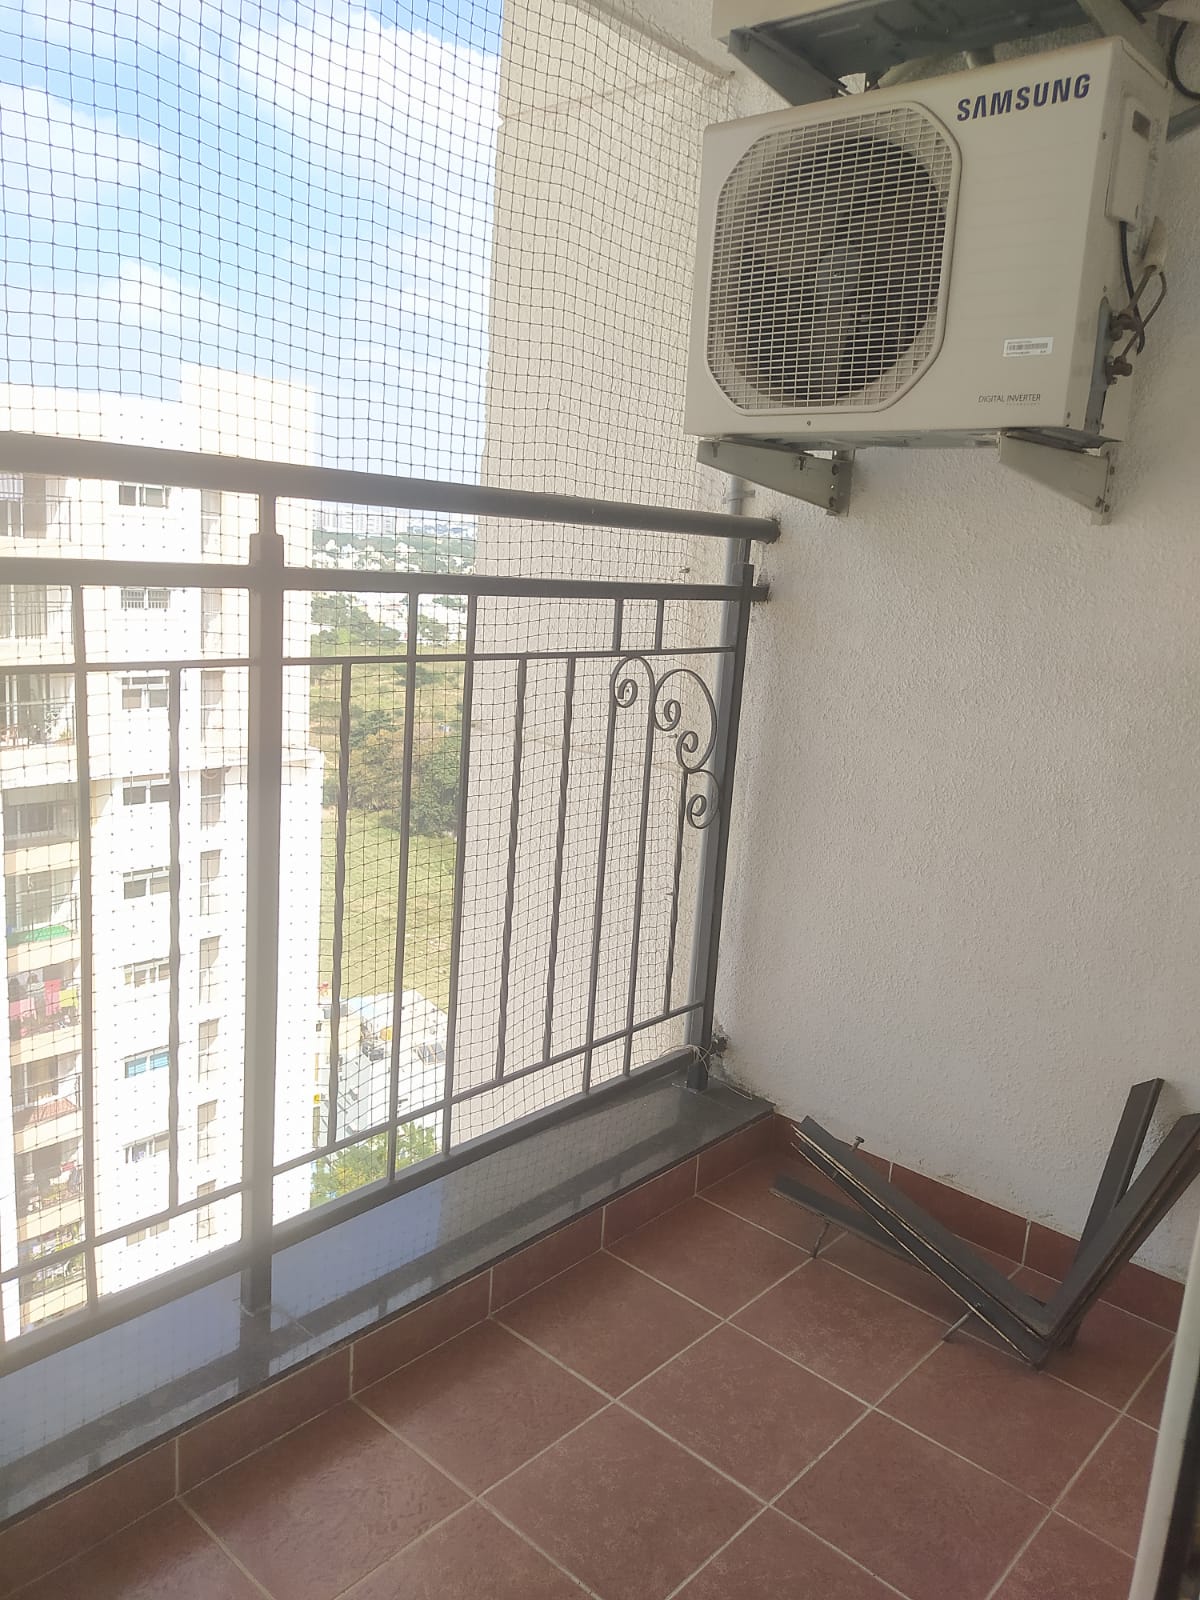 2 BHK Residential Apartment for Lease Only at JAML2 - 3369 in Kariyana Palya